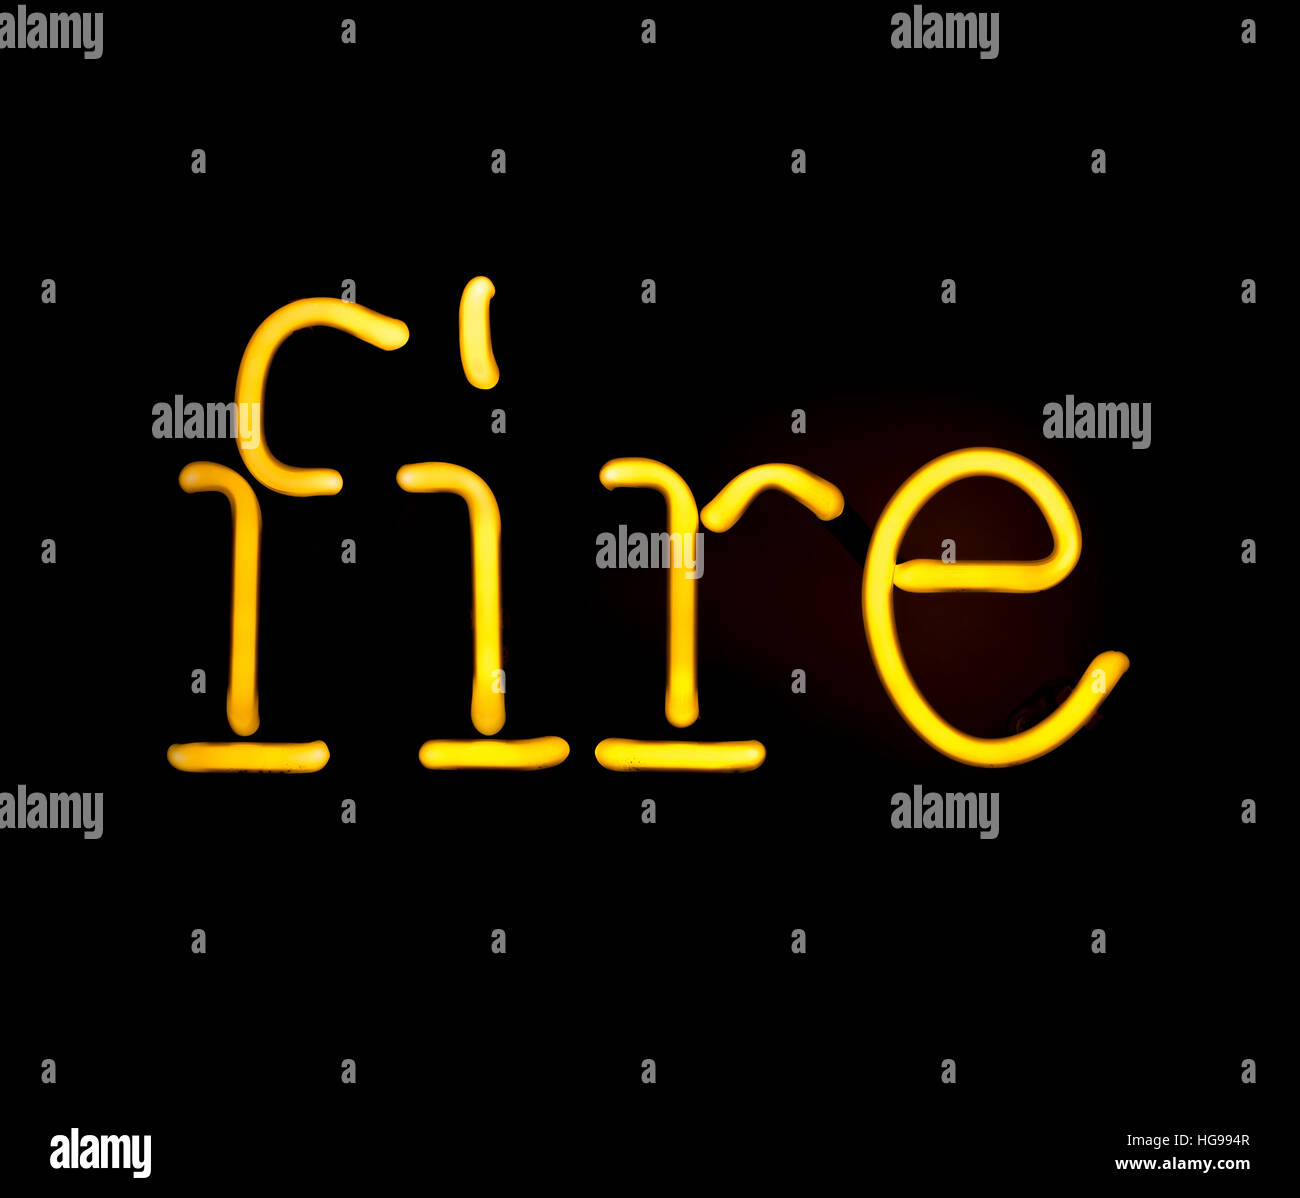 The word fire written in neon lamp Stock Photo